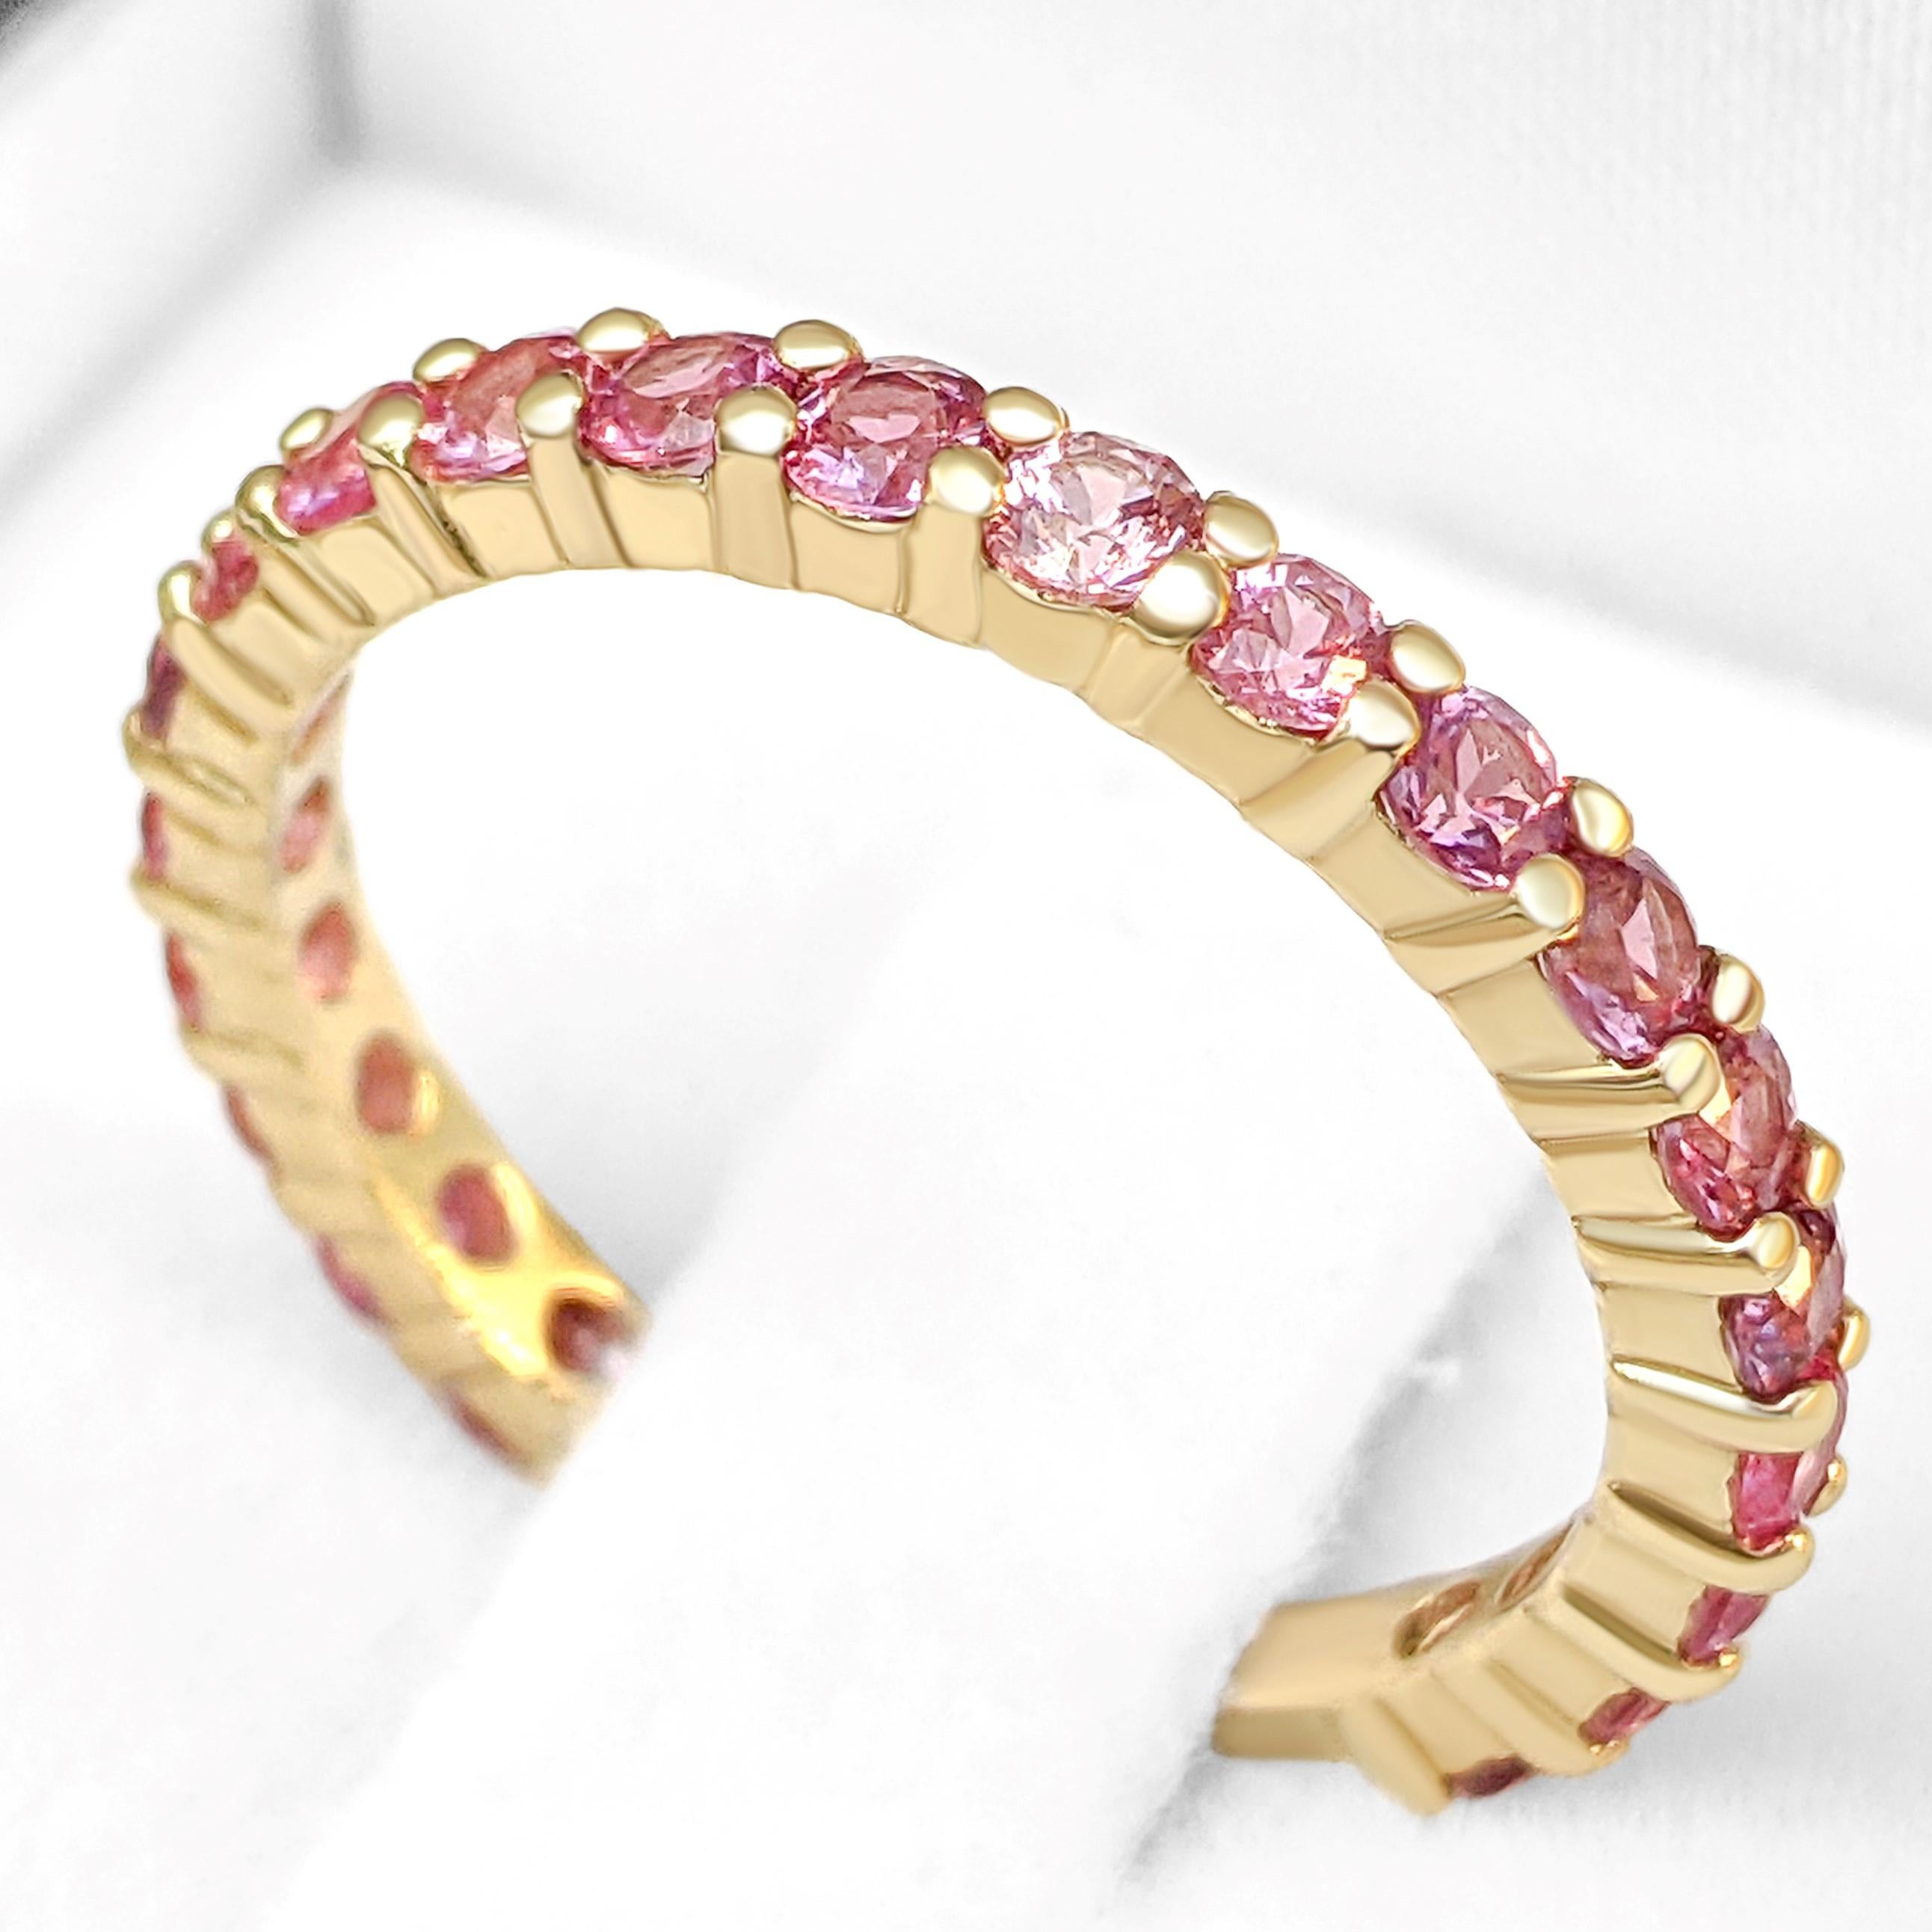 This ring is definitely a show stopper and will draw attention wherever you go! A great gift for yourself or your loved one - a heirloom piece to treasure forever!

Center Natural Sapphire:
Weight: 1.20 ct, 21 stones
Color: Pink
Shape: Round